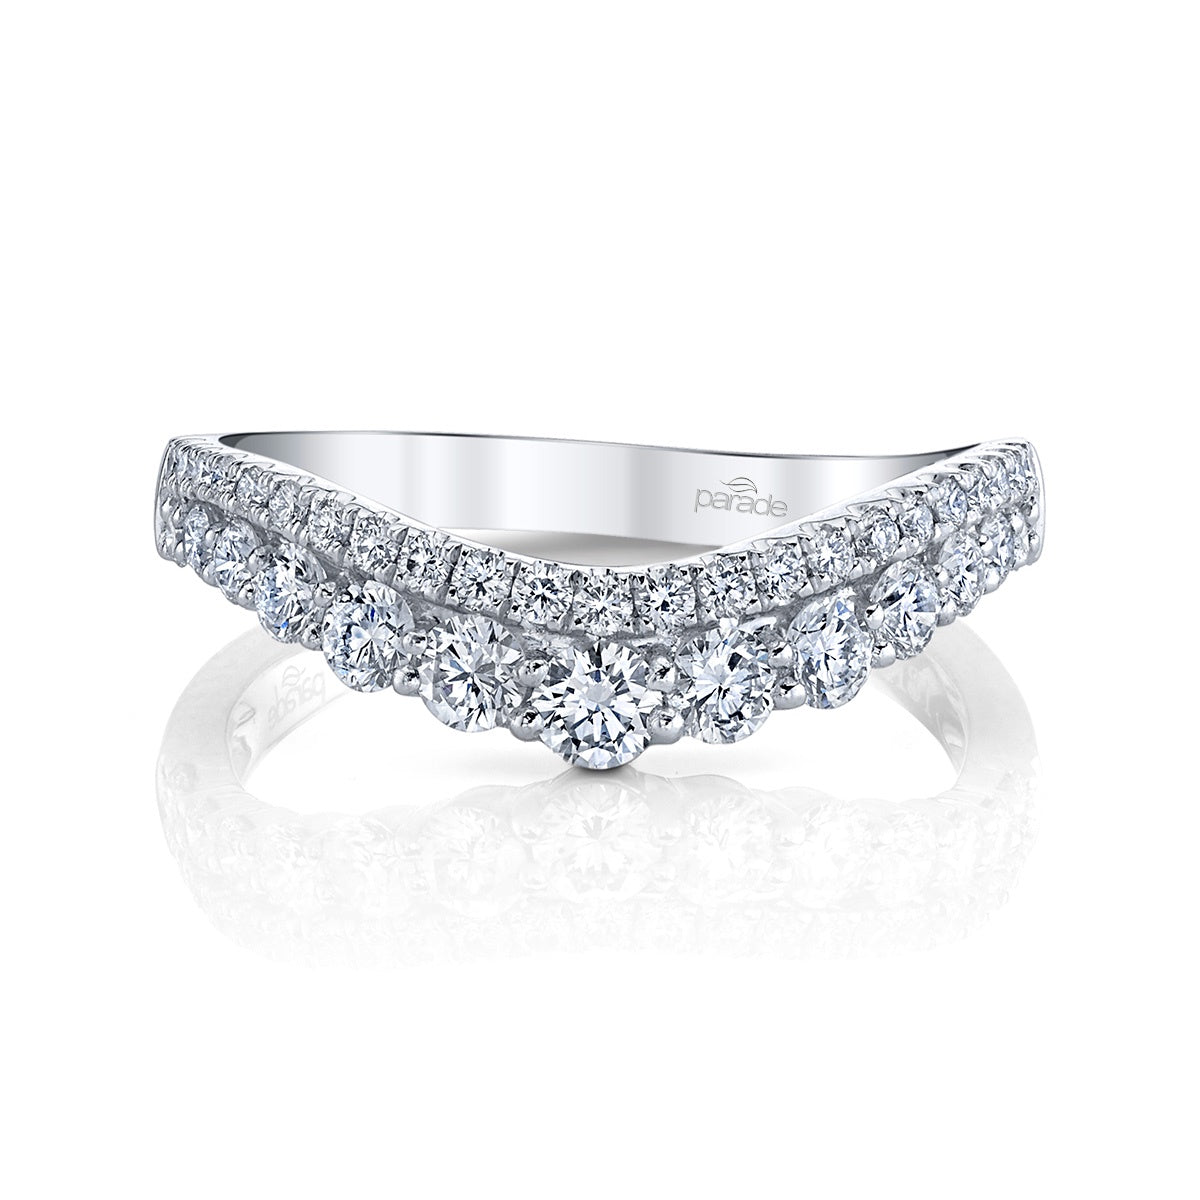 14KW 0.73CT Curved Diamond Band